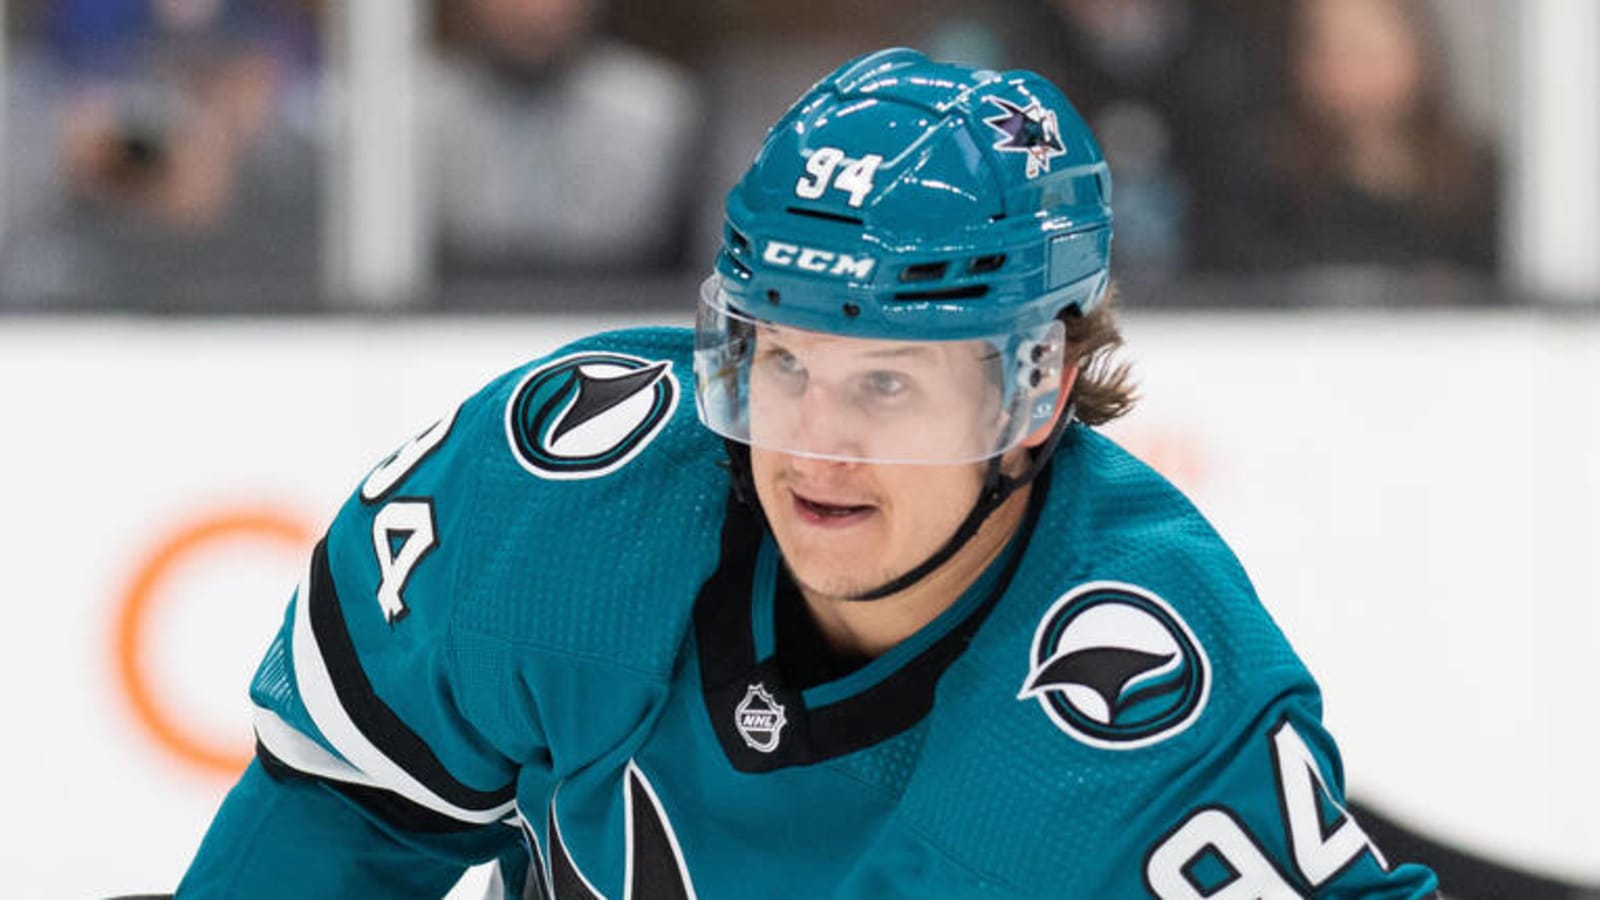 Sharks’ Barabanov out for 'a while' with upper-body injury